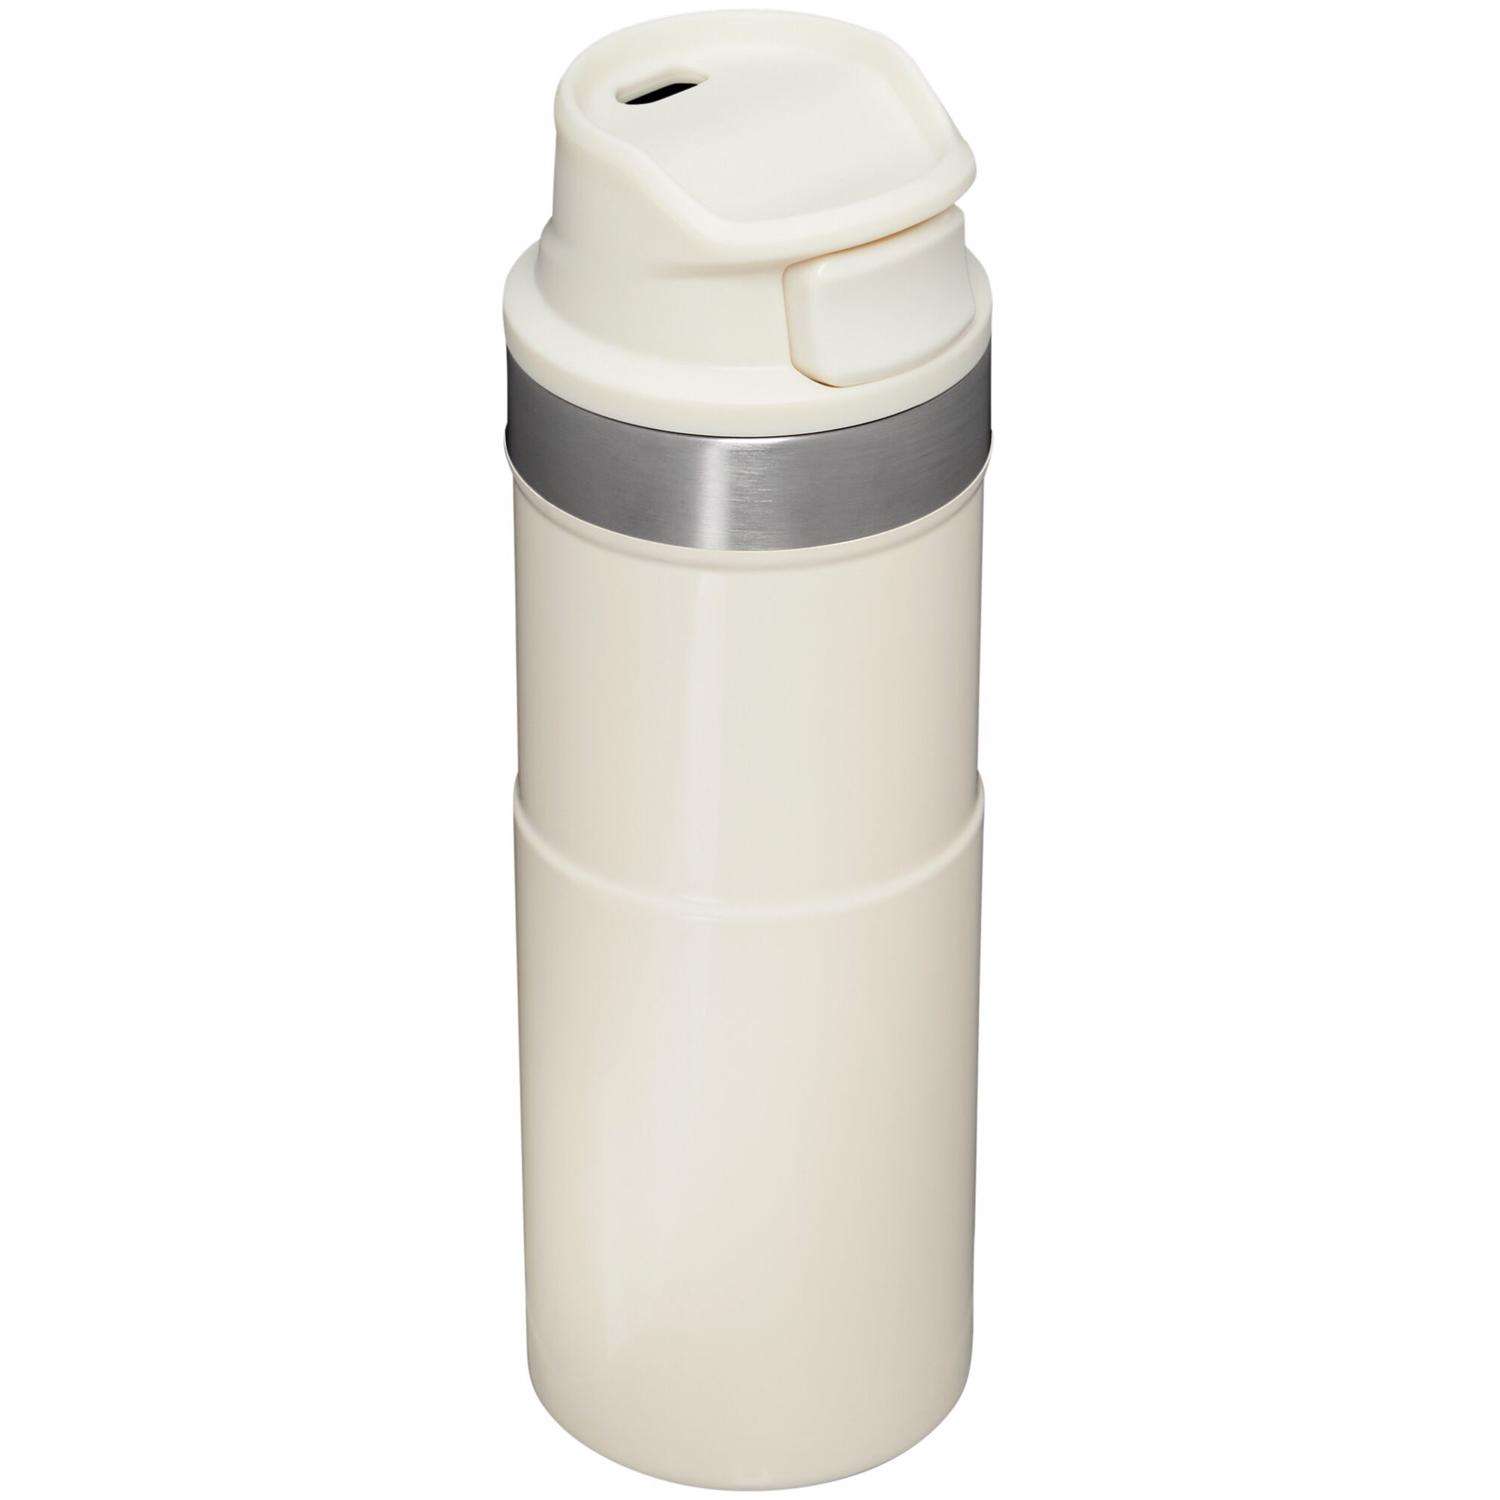 Review: Stanley 16oz Classic Vacuum Flask